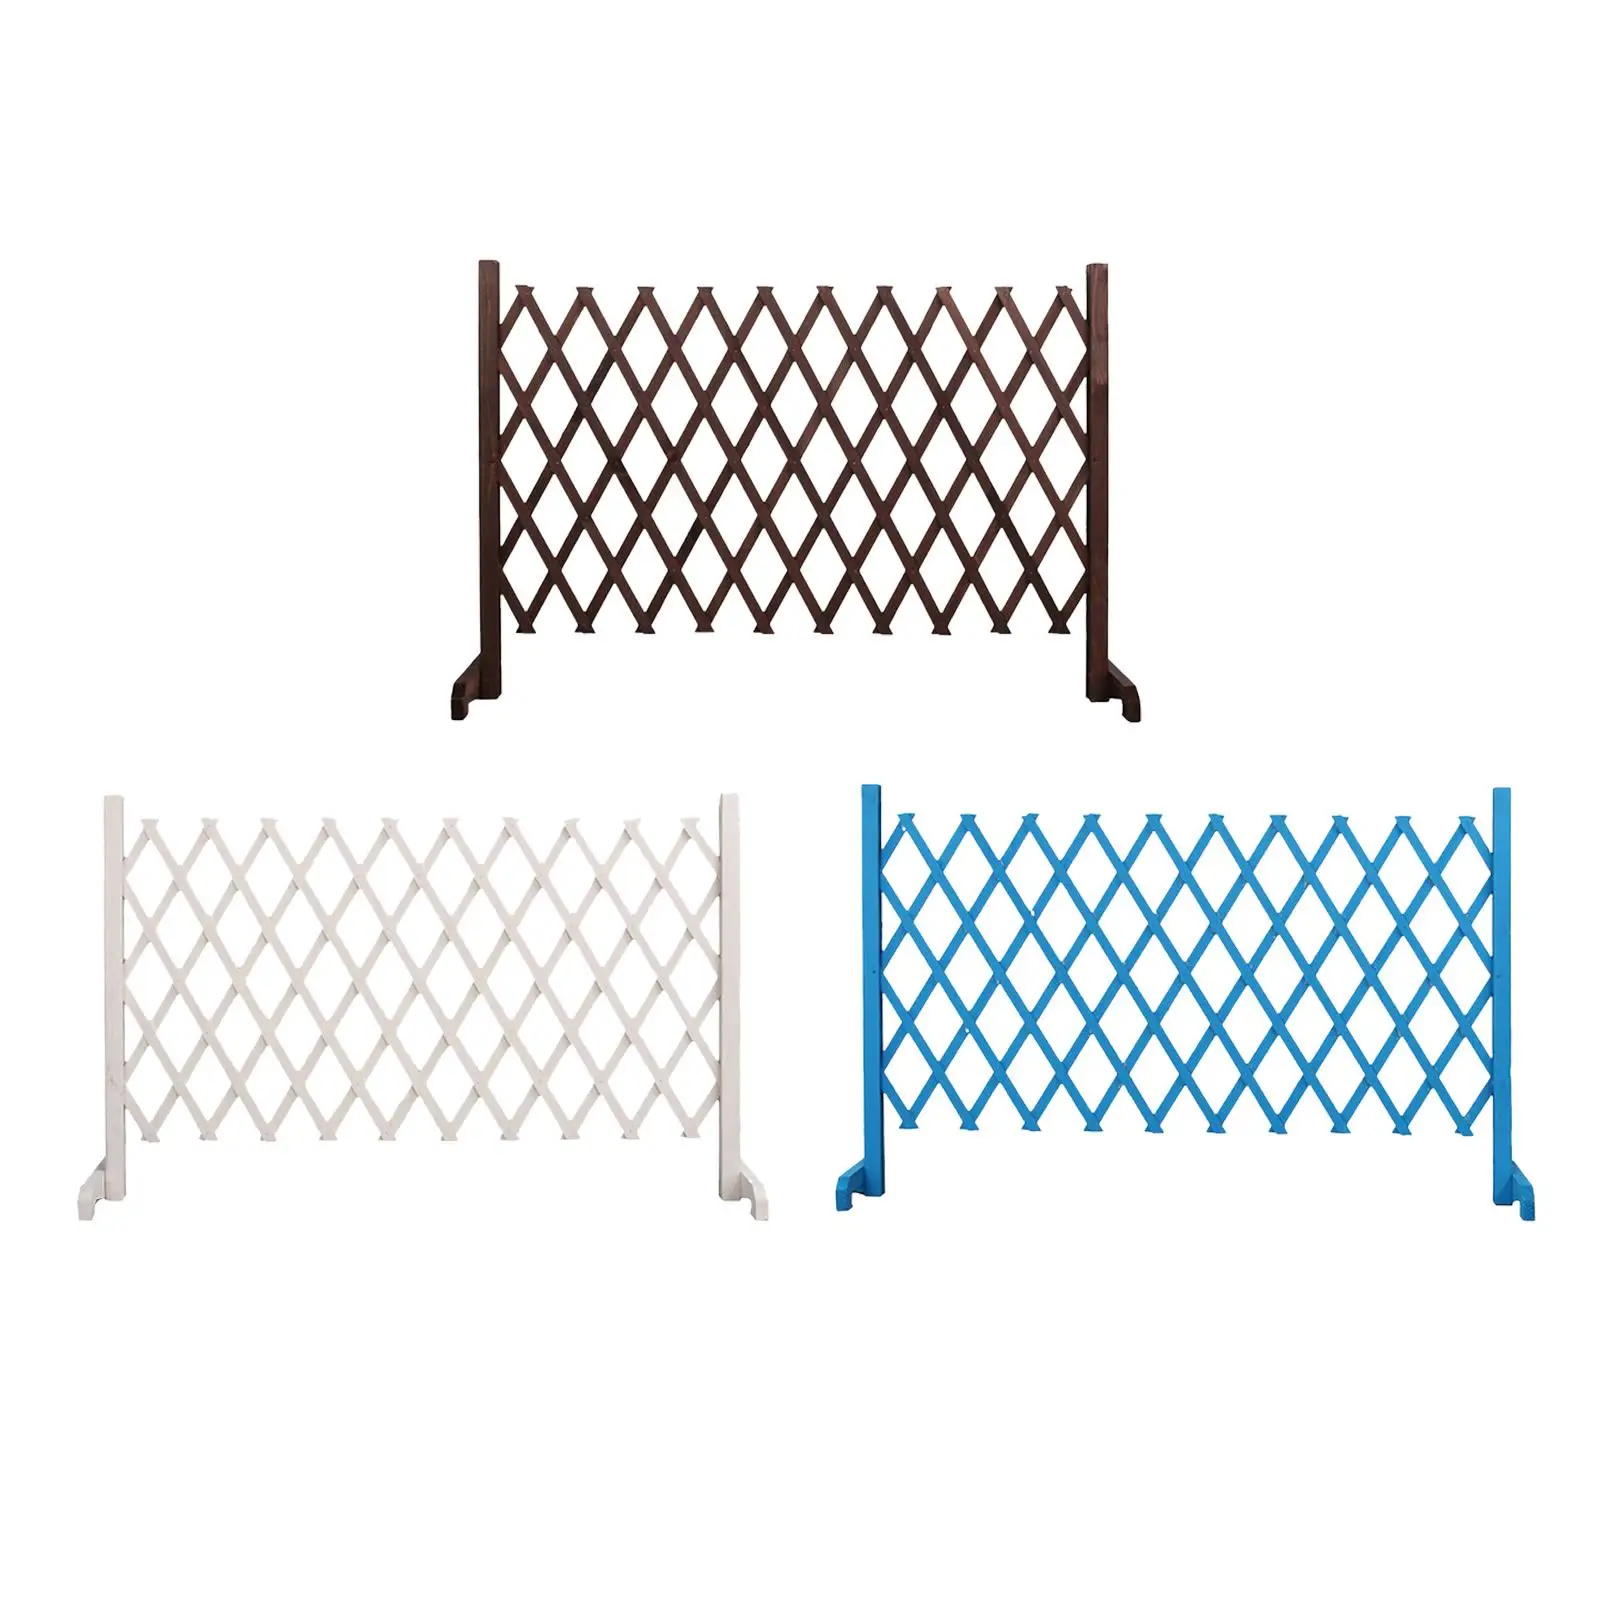 Dog Gate Expanding Folding Fence Barrier Pet Fence for Garden Lawn Stairways